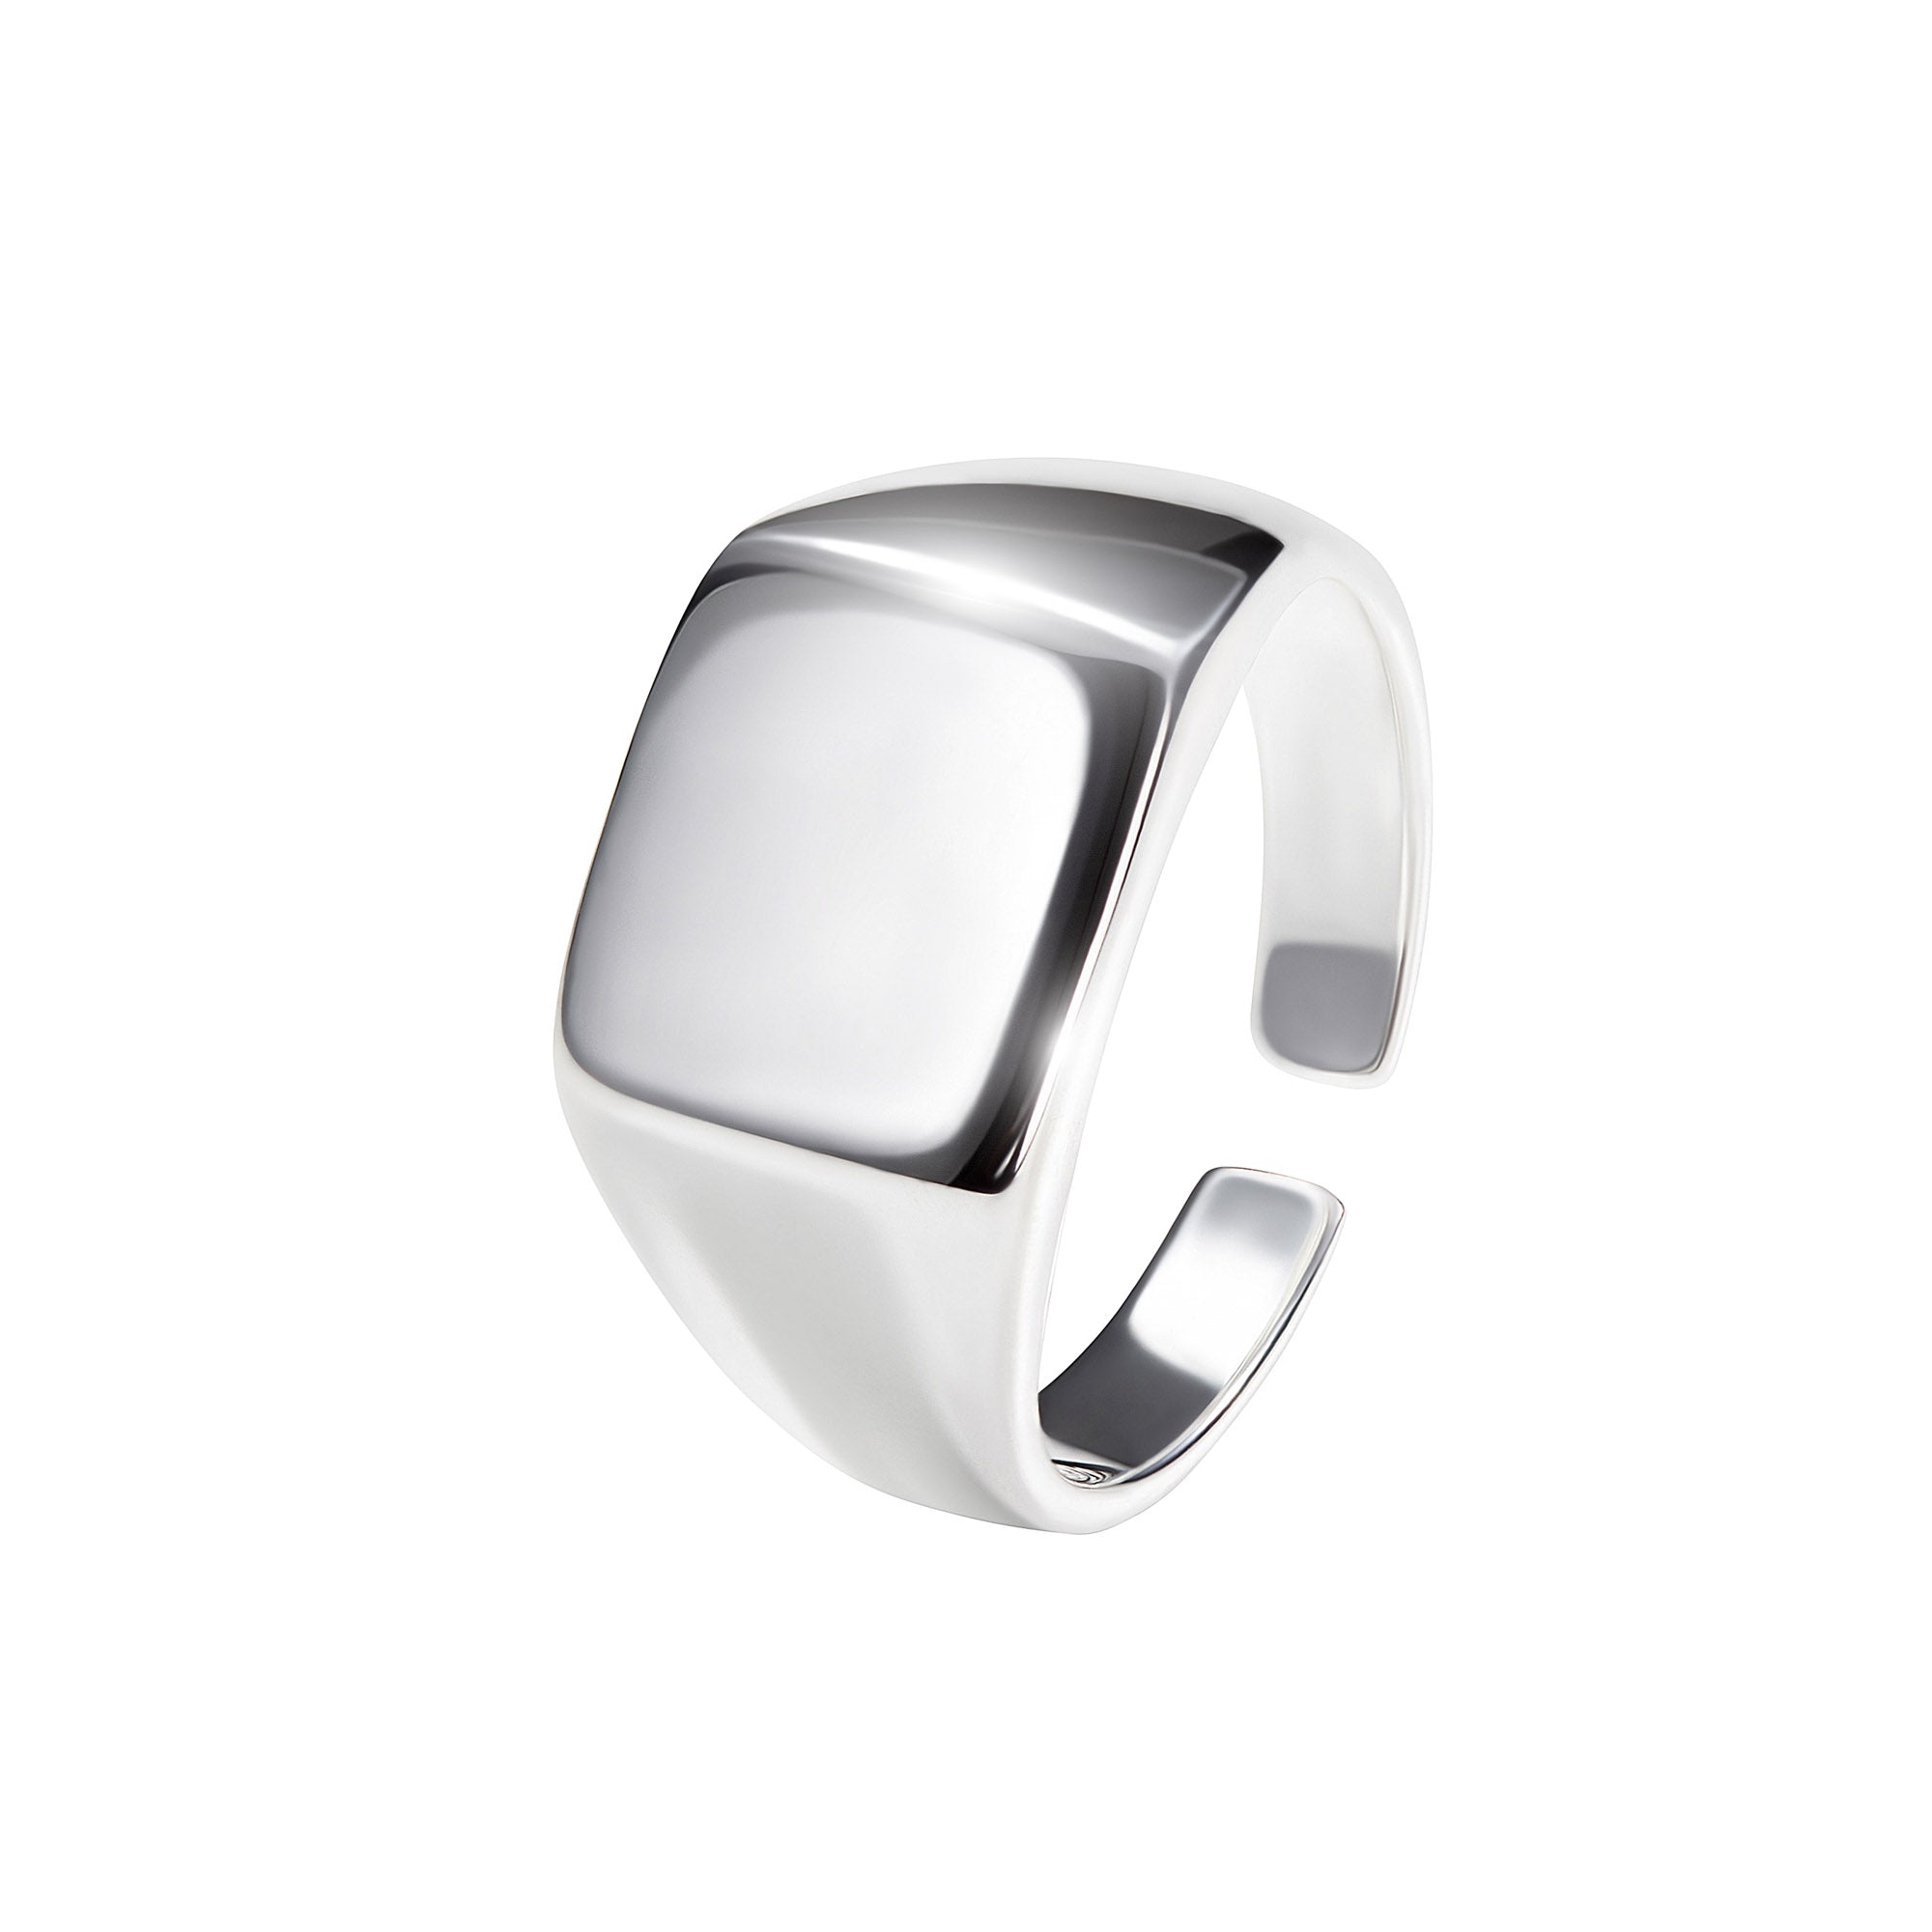 Rounded signet ring ✘ Lot ring - 925 silver